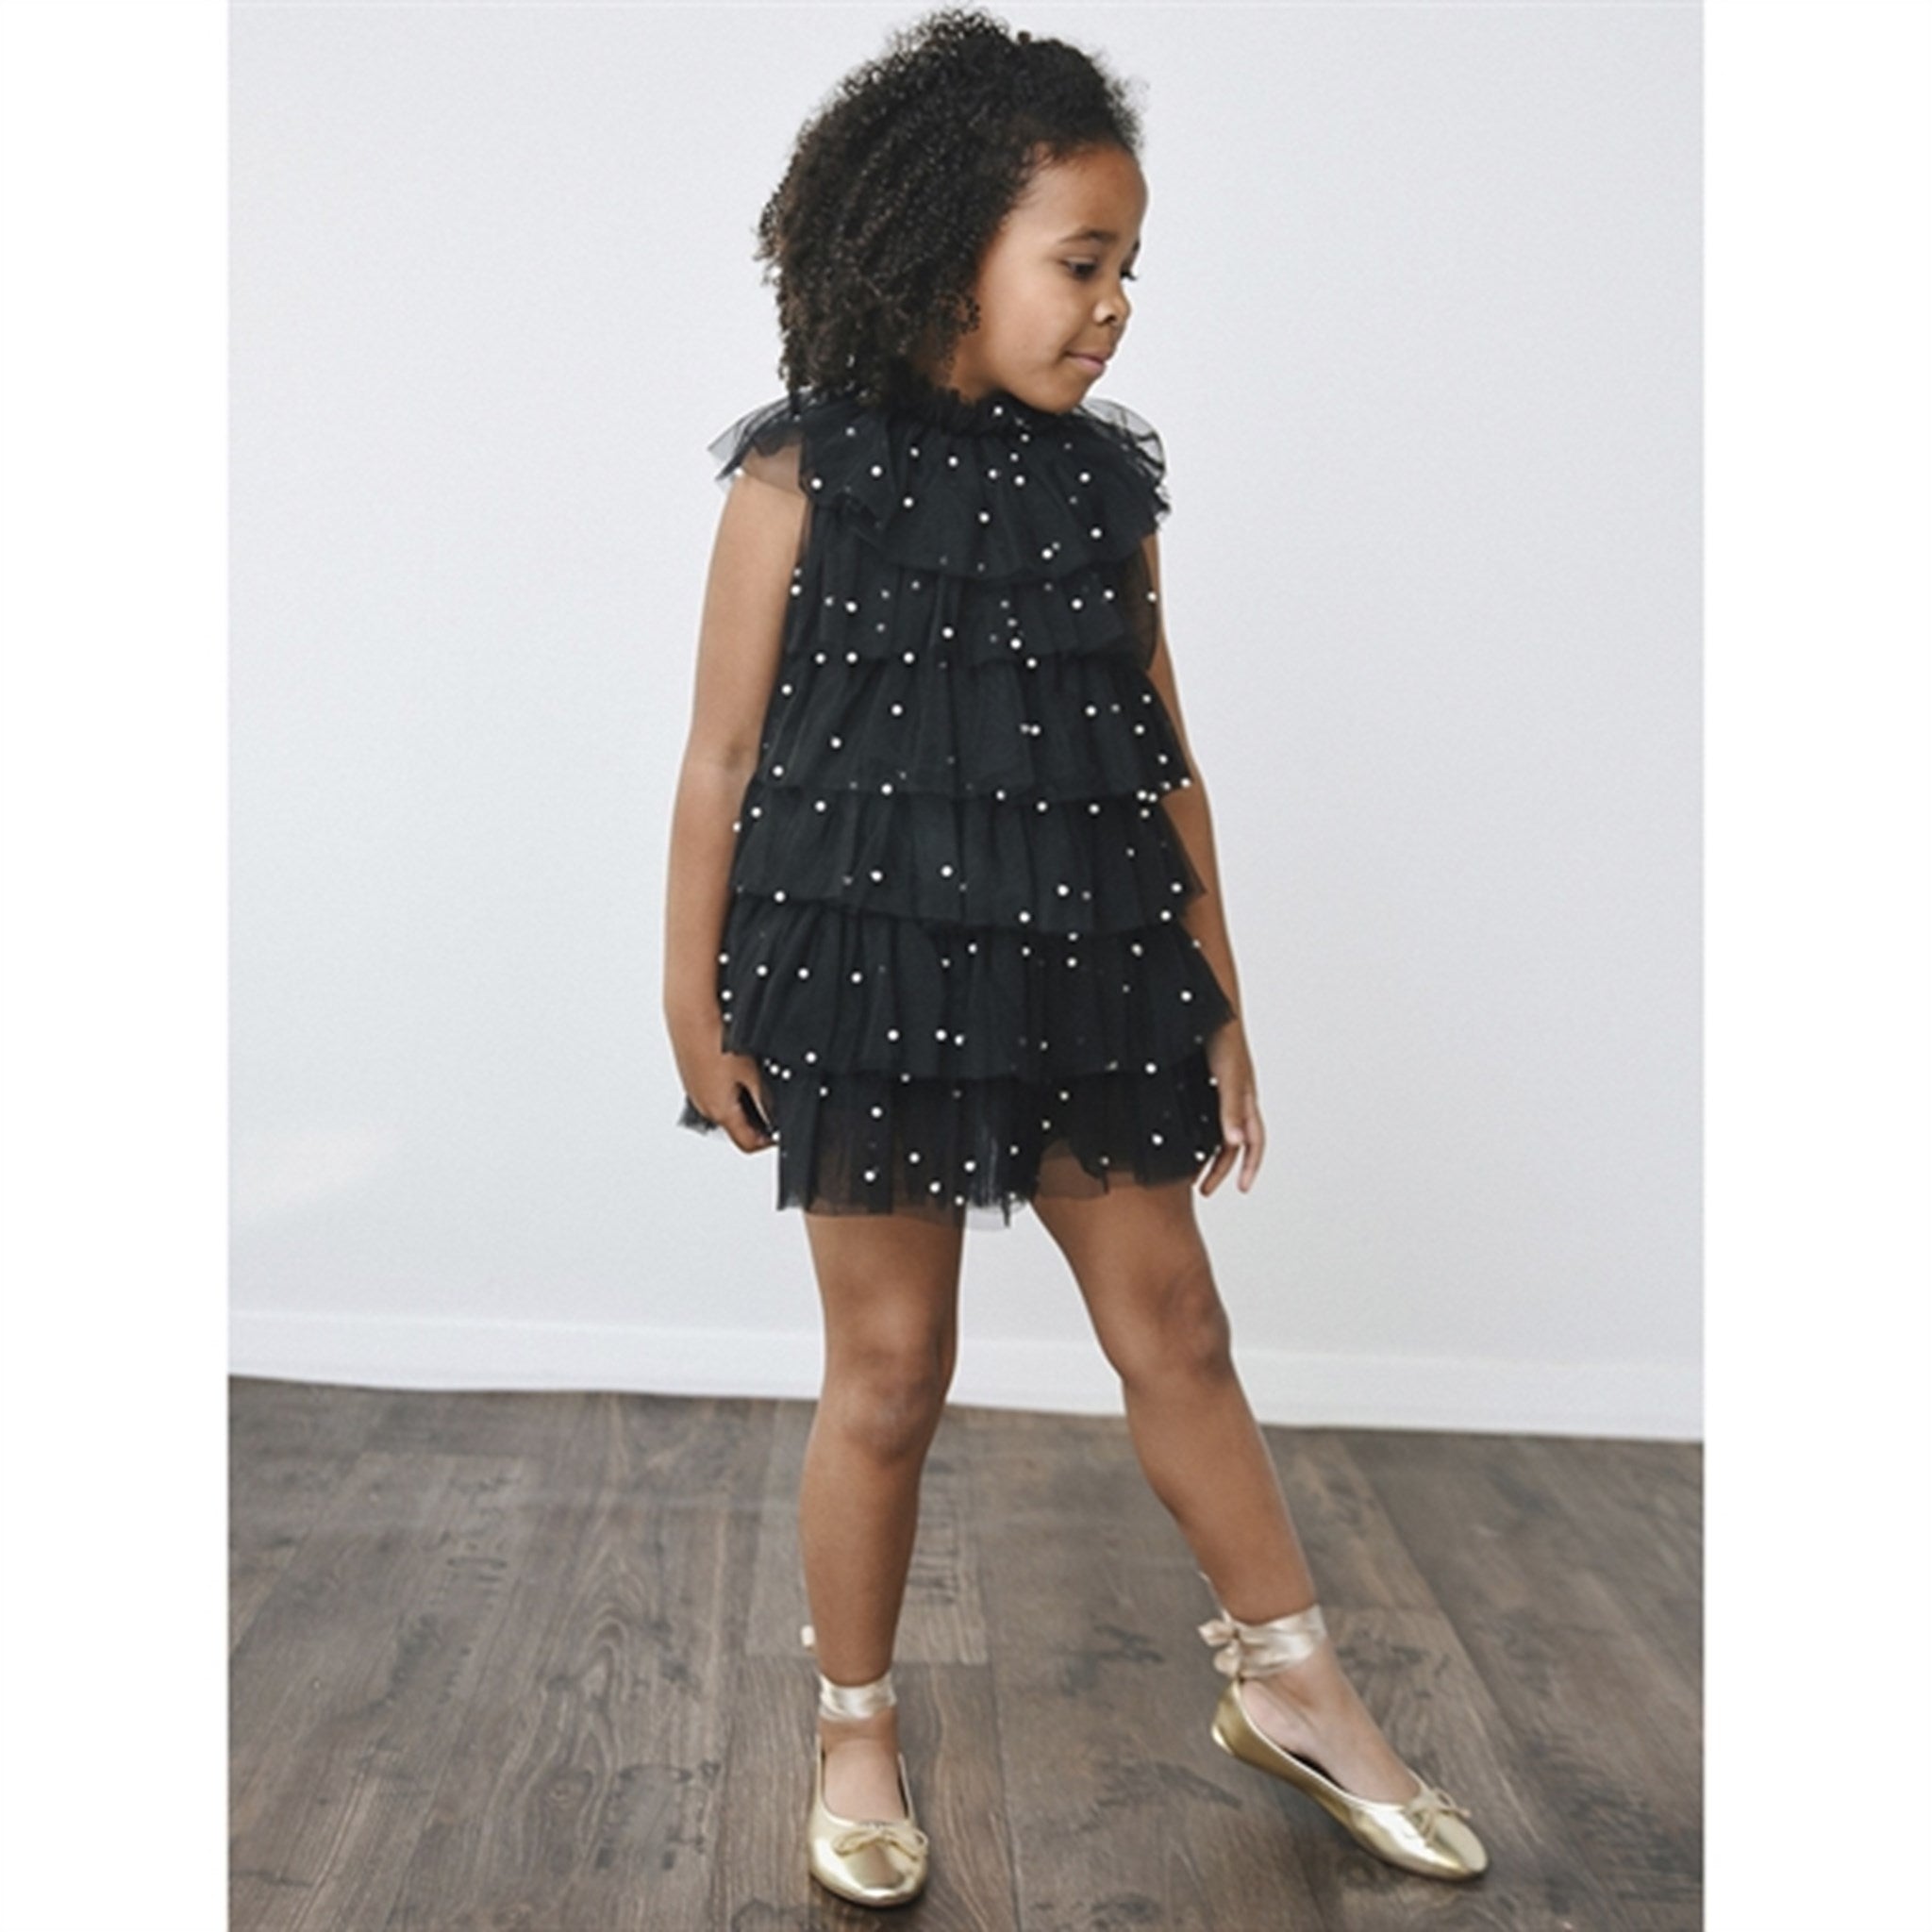 Dolly by Le Petit Tom Pearl Tutully Tiered Tulle Tuttu Klänning Black 6